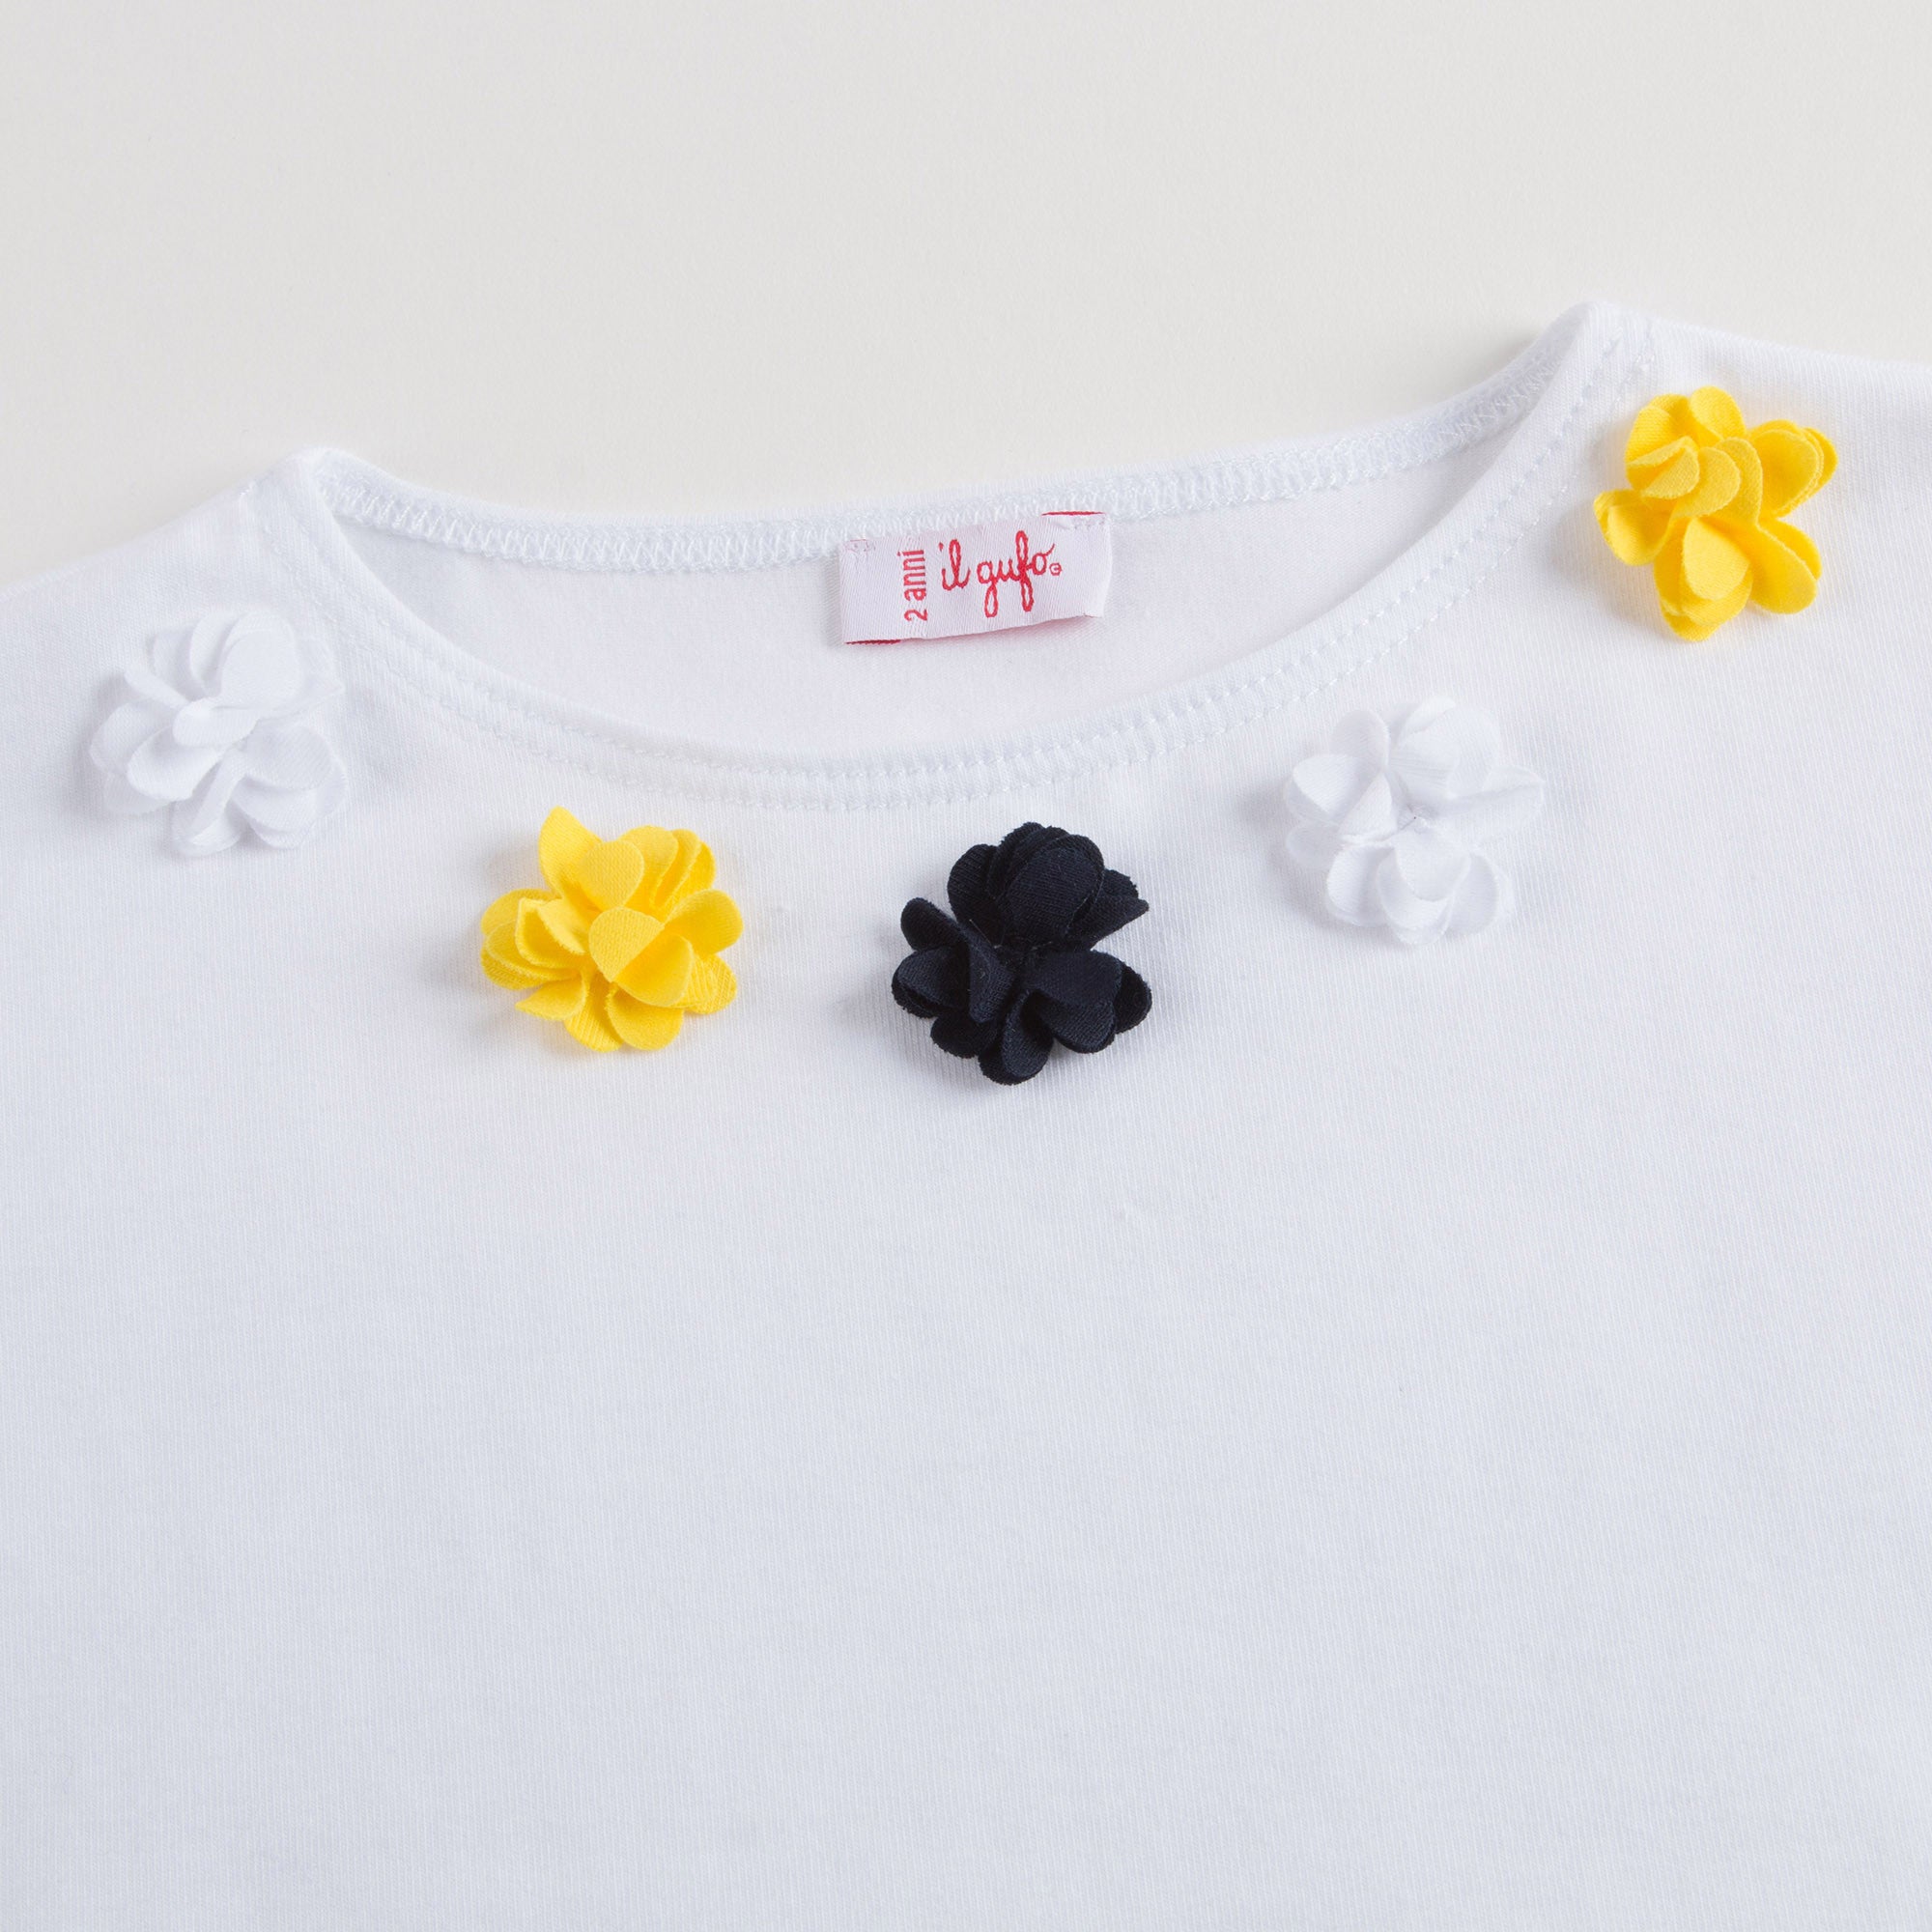 Girls White Cotton T-shirt with Flowers